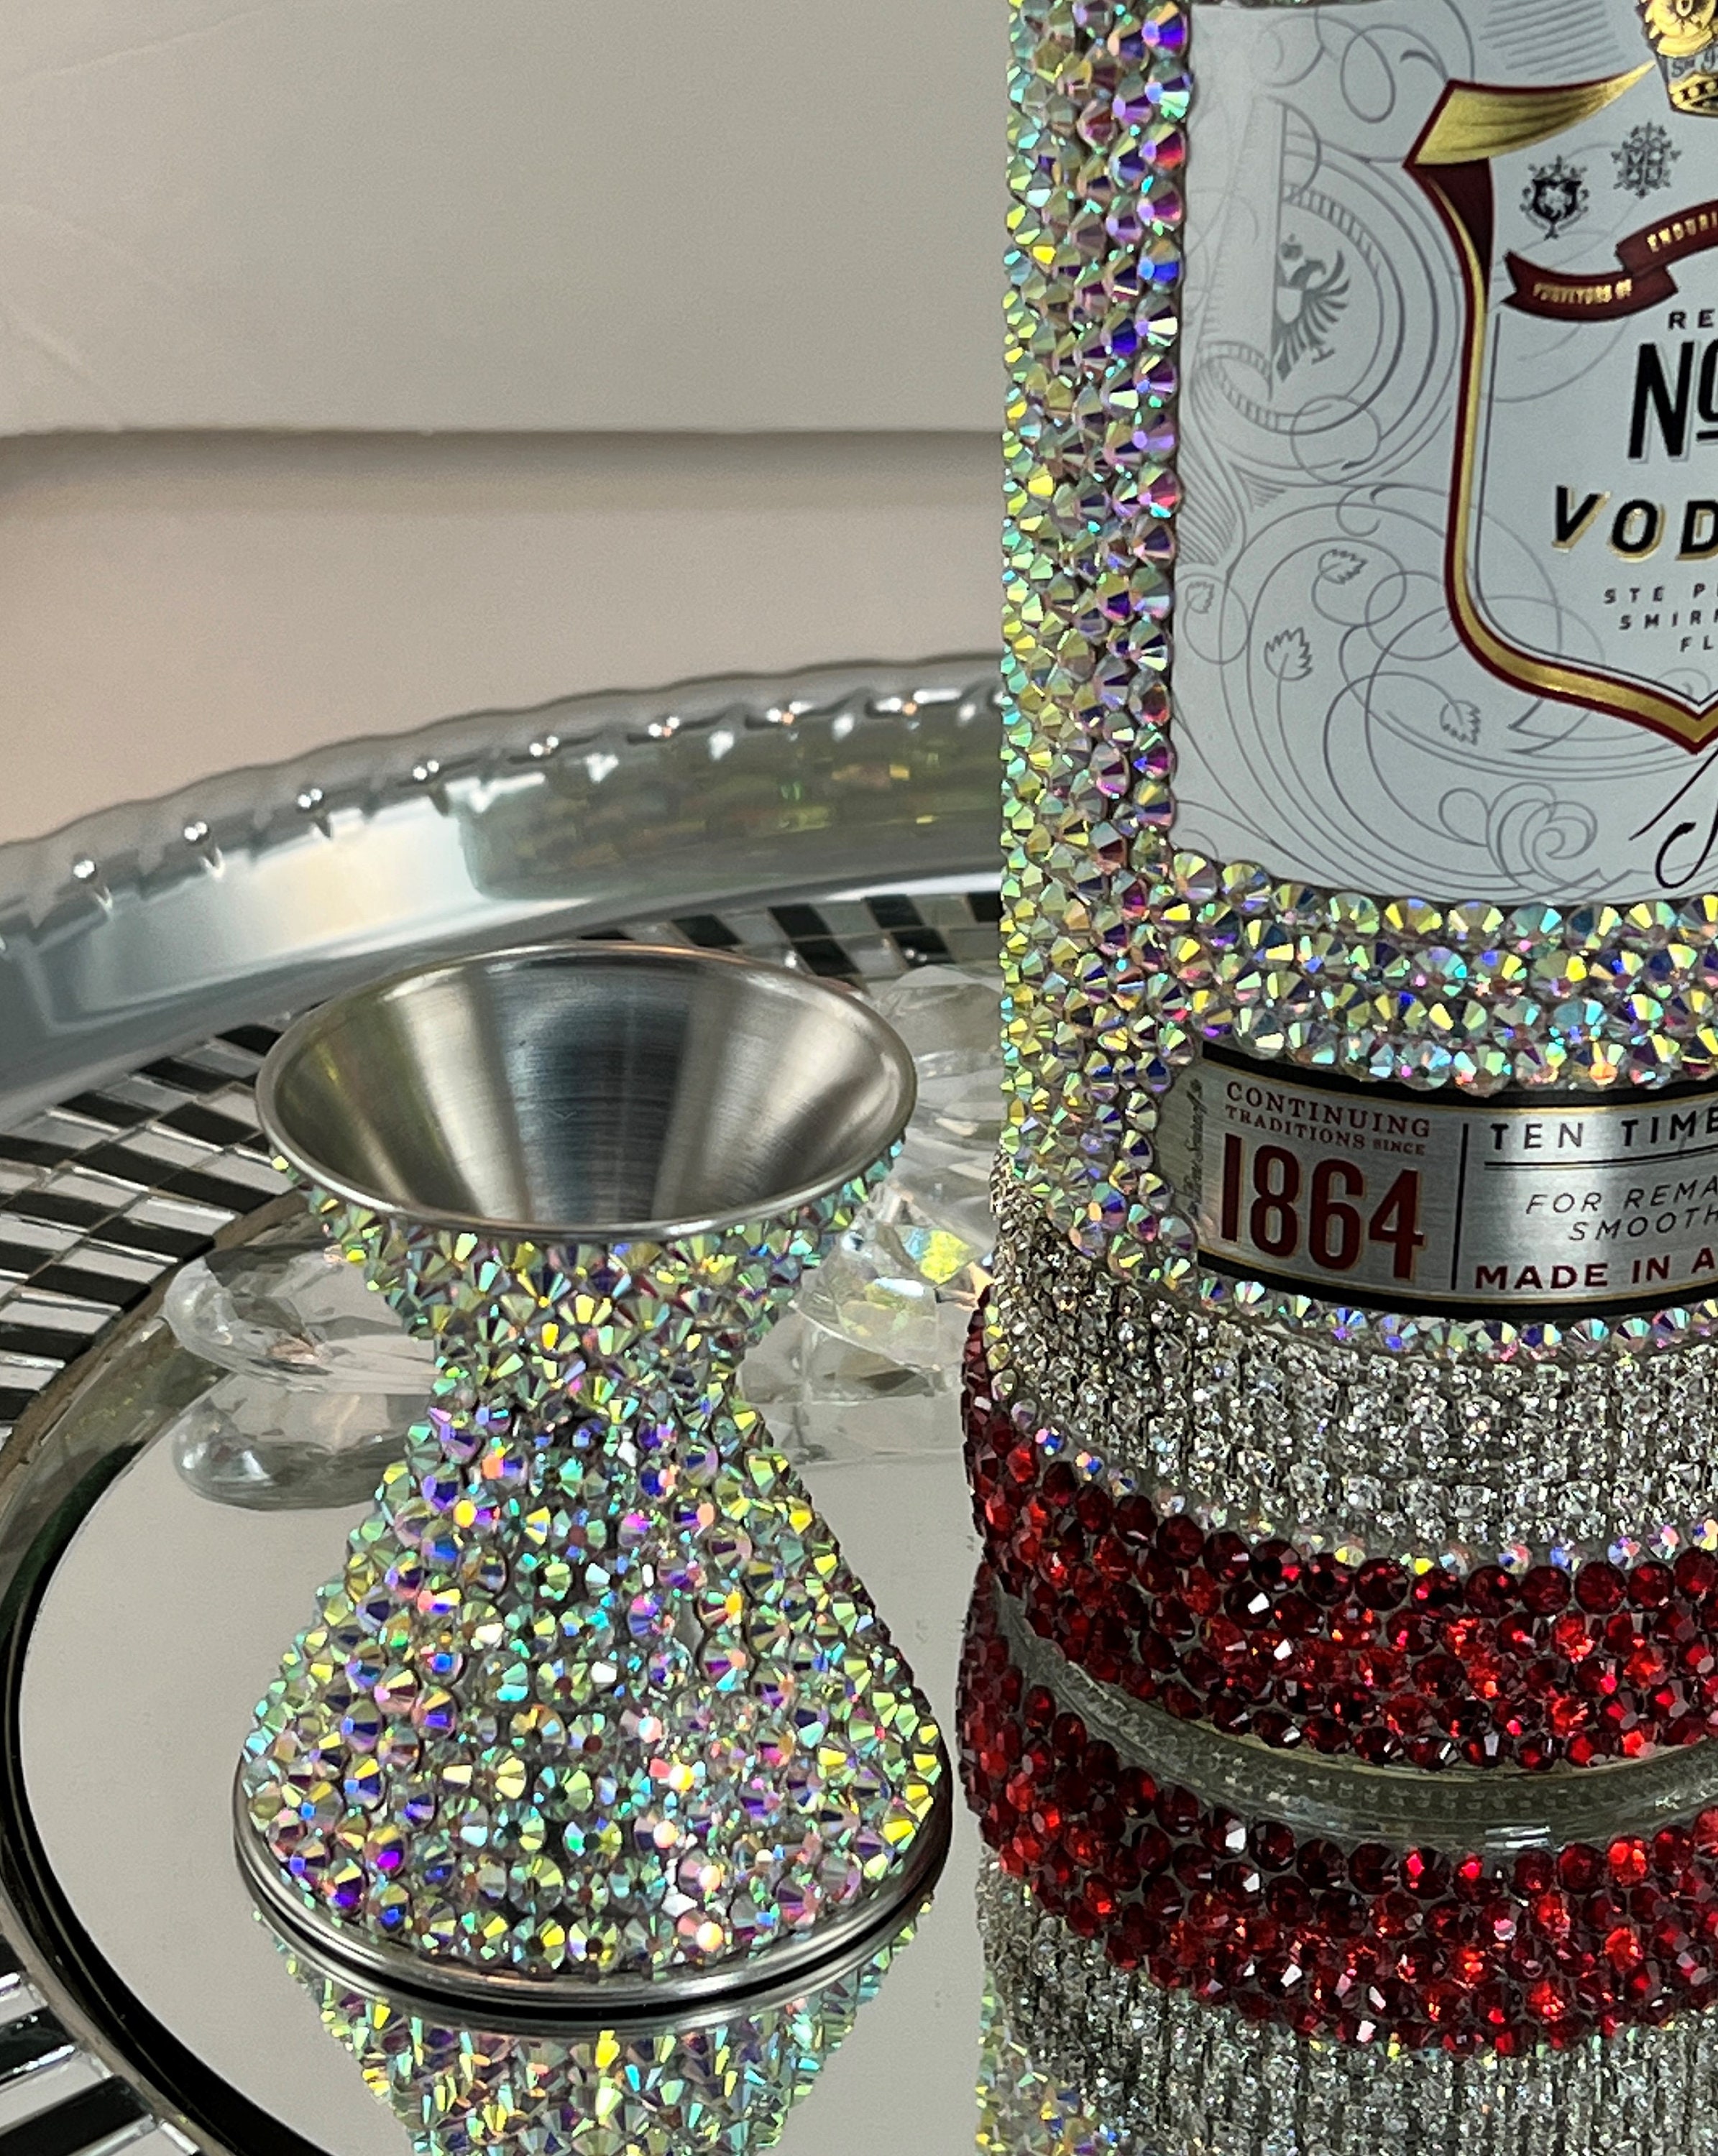 Bigger Bedazzled Bling Rhinestone Stainless Steel Alcohol Jigger